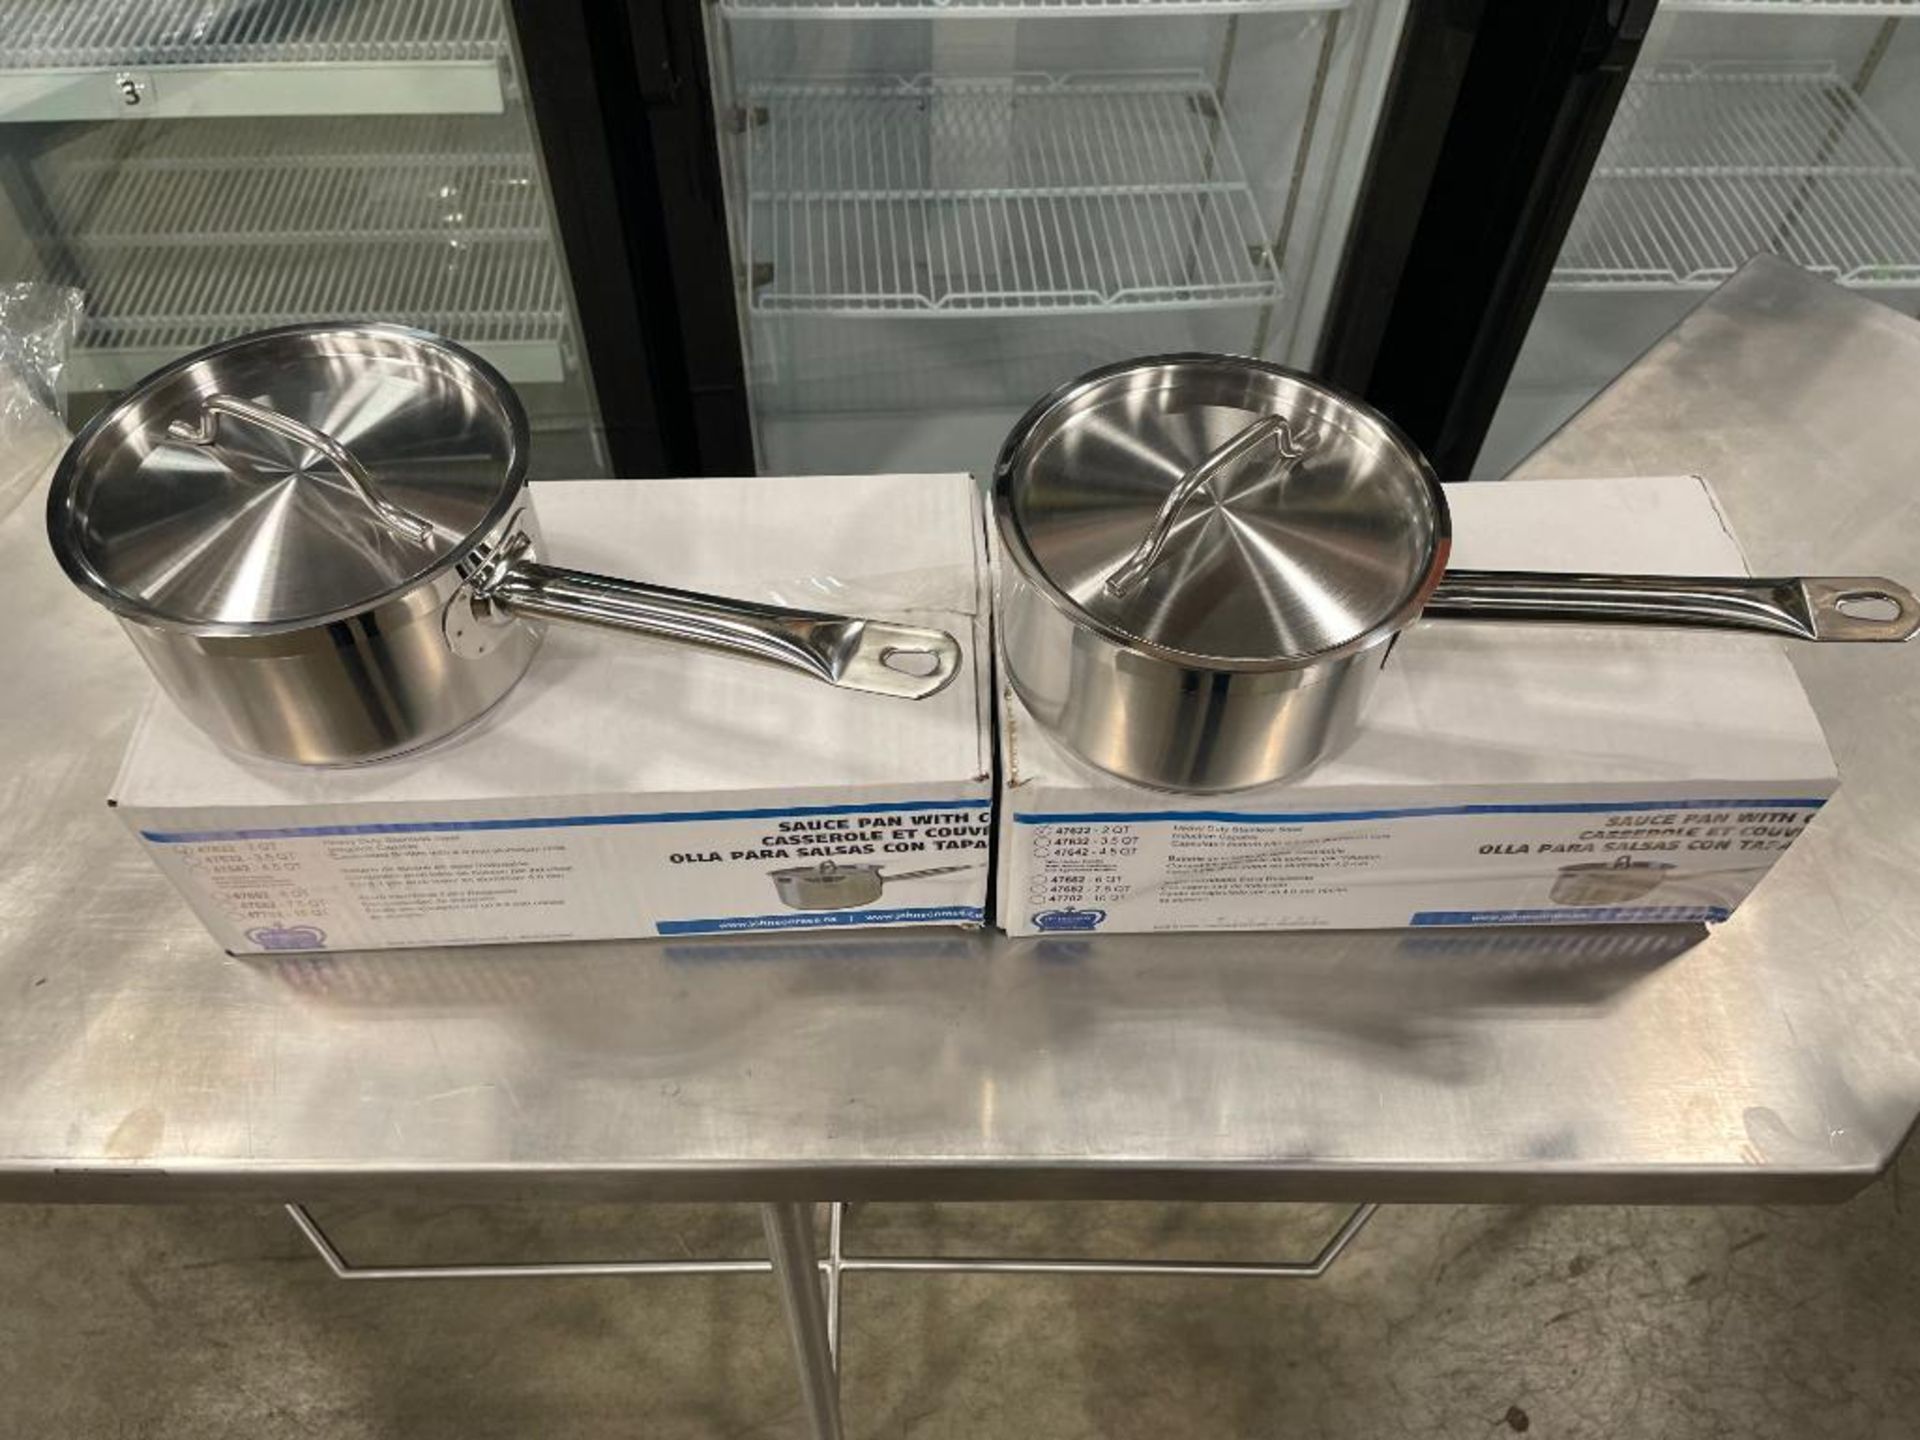 (2) 2QT HEAVY DUTY STAINLESS SAUCE PAN SET INDUCTION CAPABLE, JR 47622 - NEW - Image 4 of 7